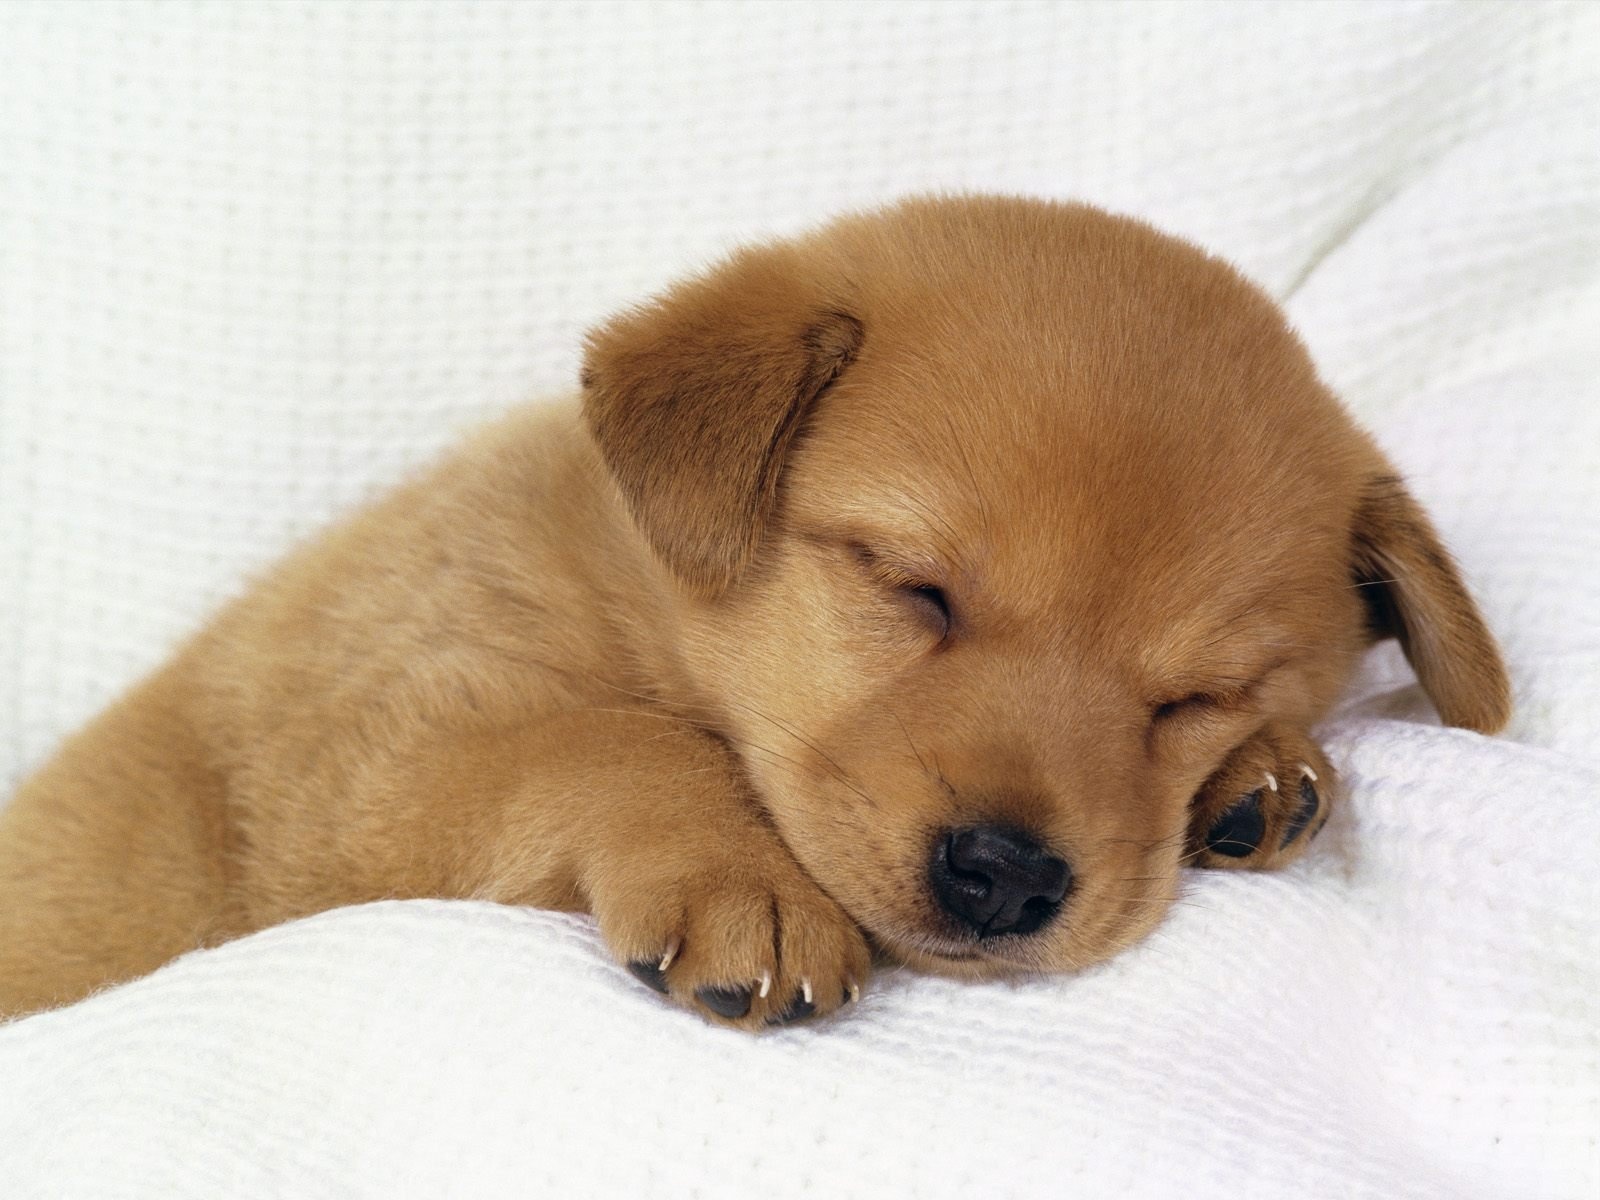 Cute Sleeping Dogs And Babies Wallpaper